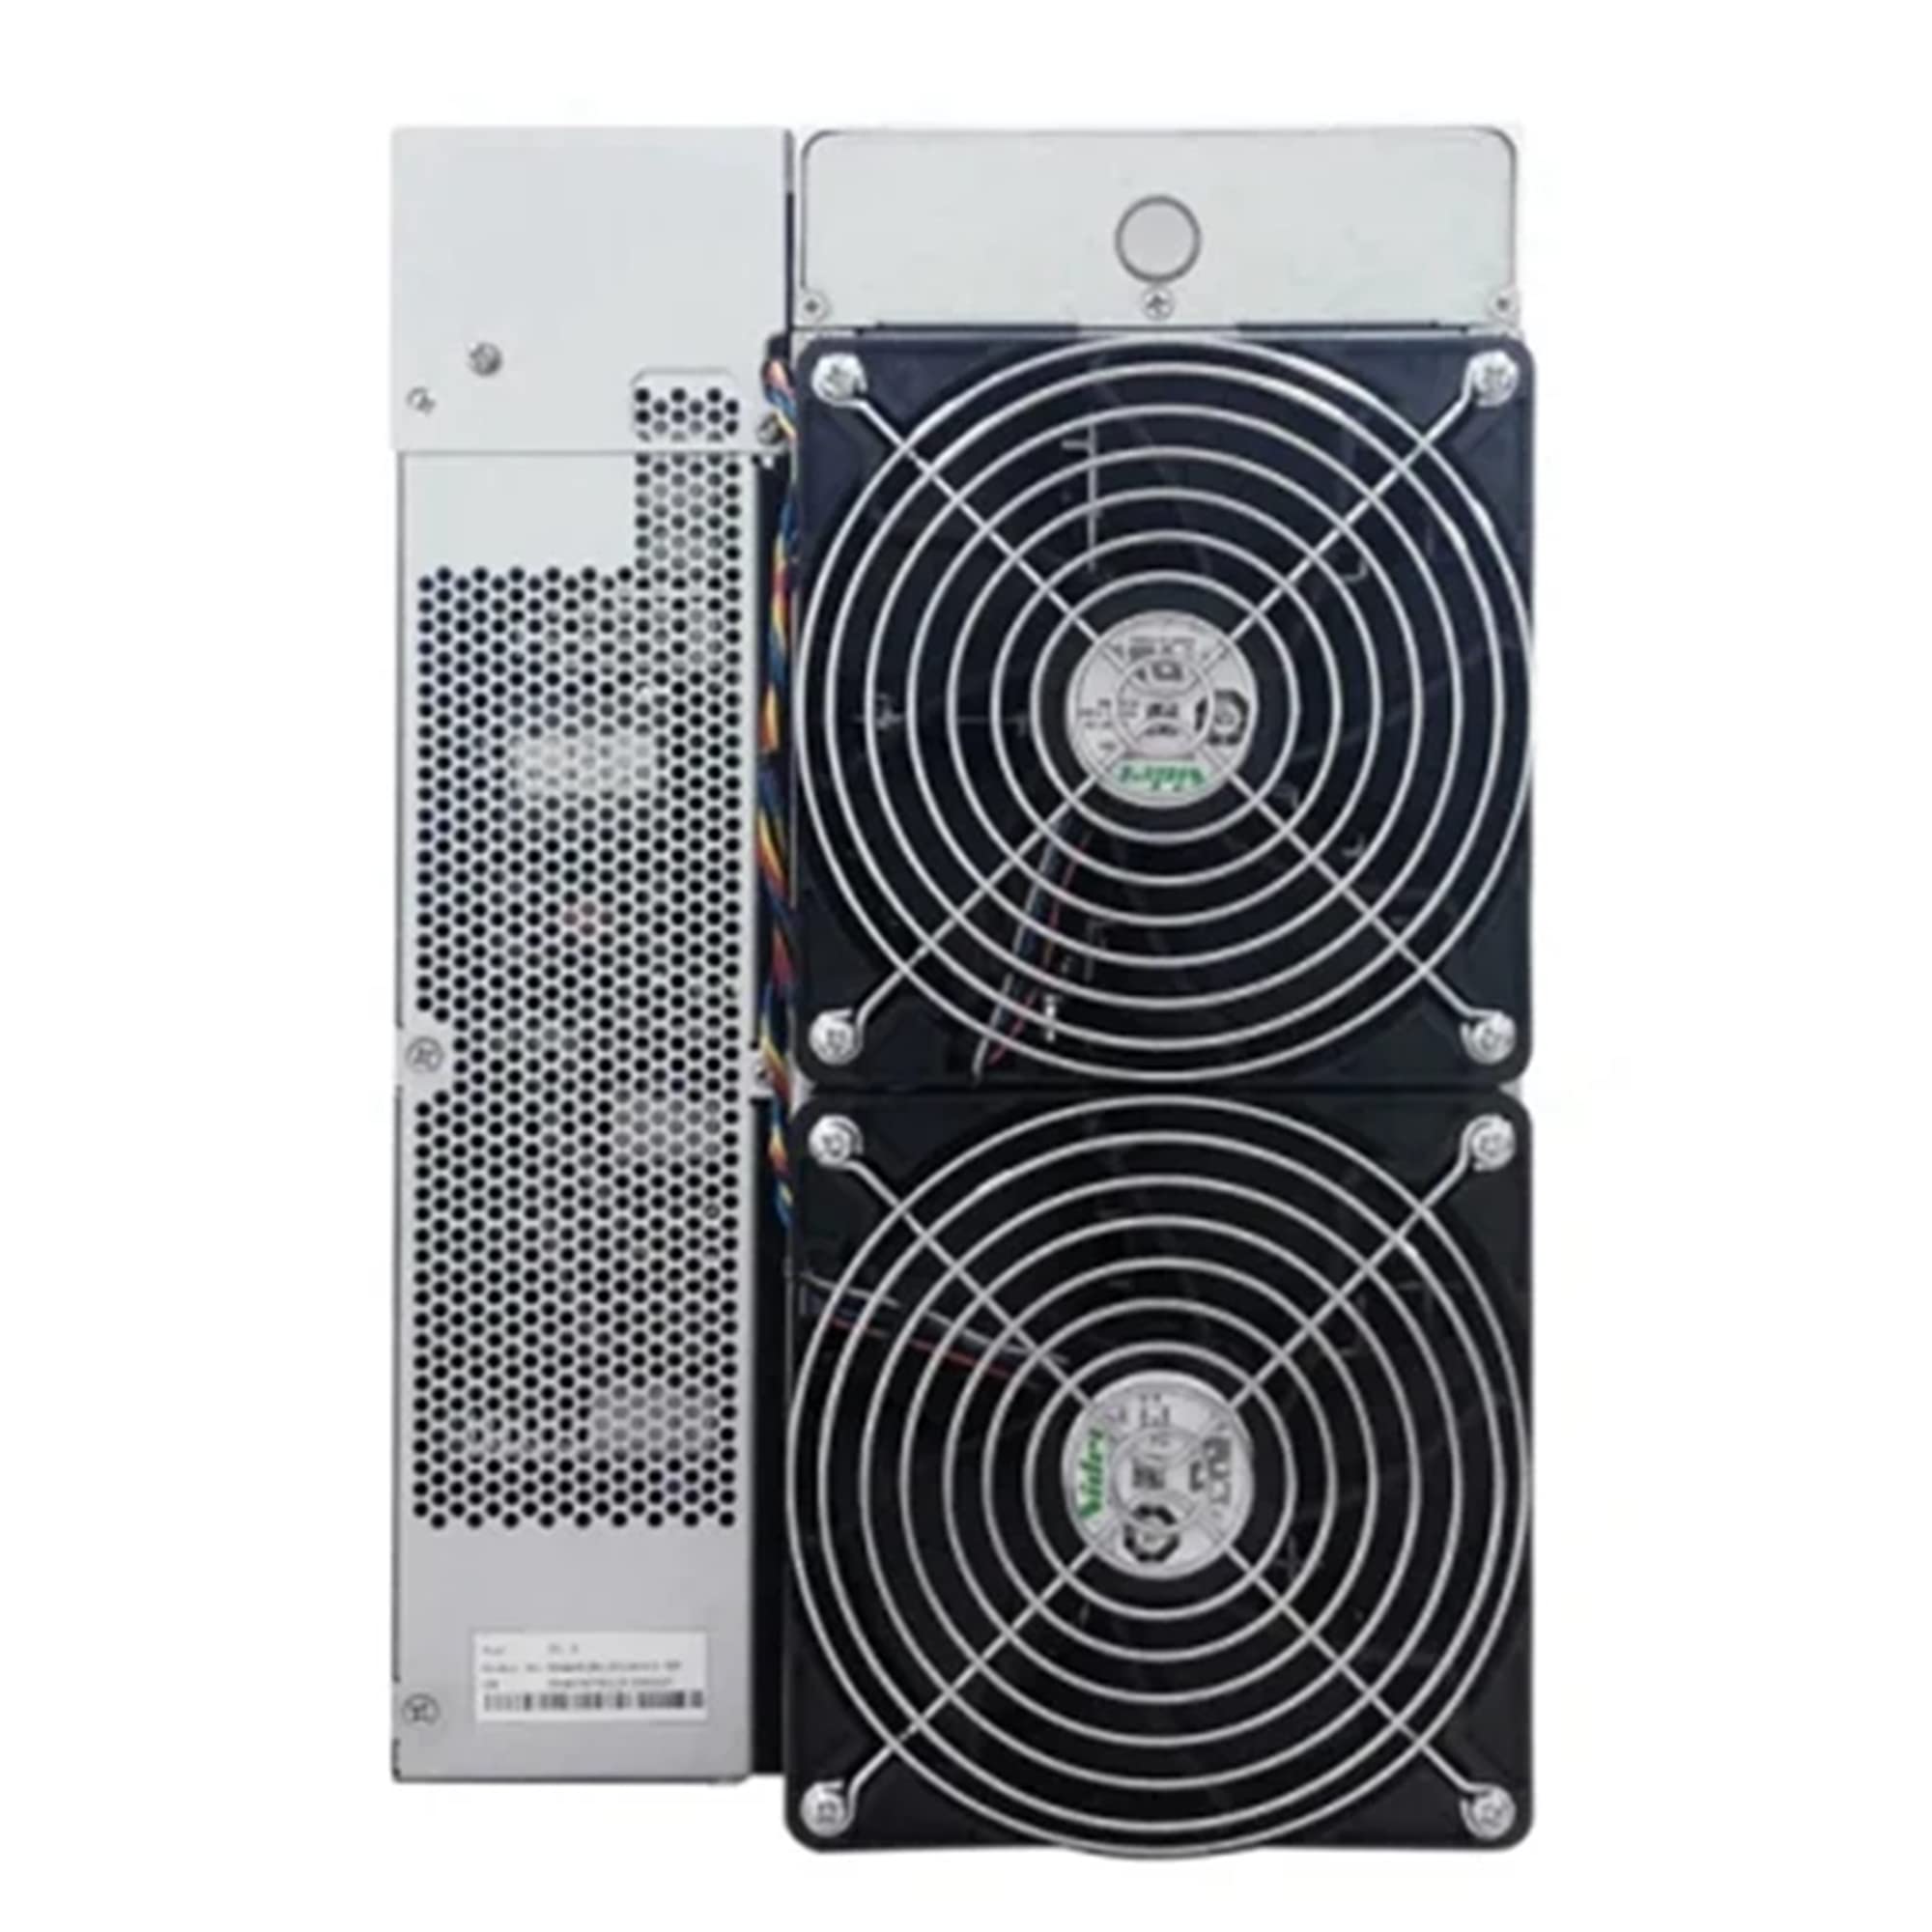 Antminer S19 PRO 110TH/S Bitcoin Miner 3250W BTC Miner ASIC Miner Include Power Supply - New